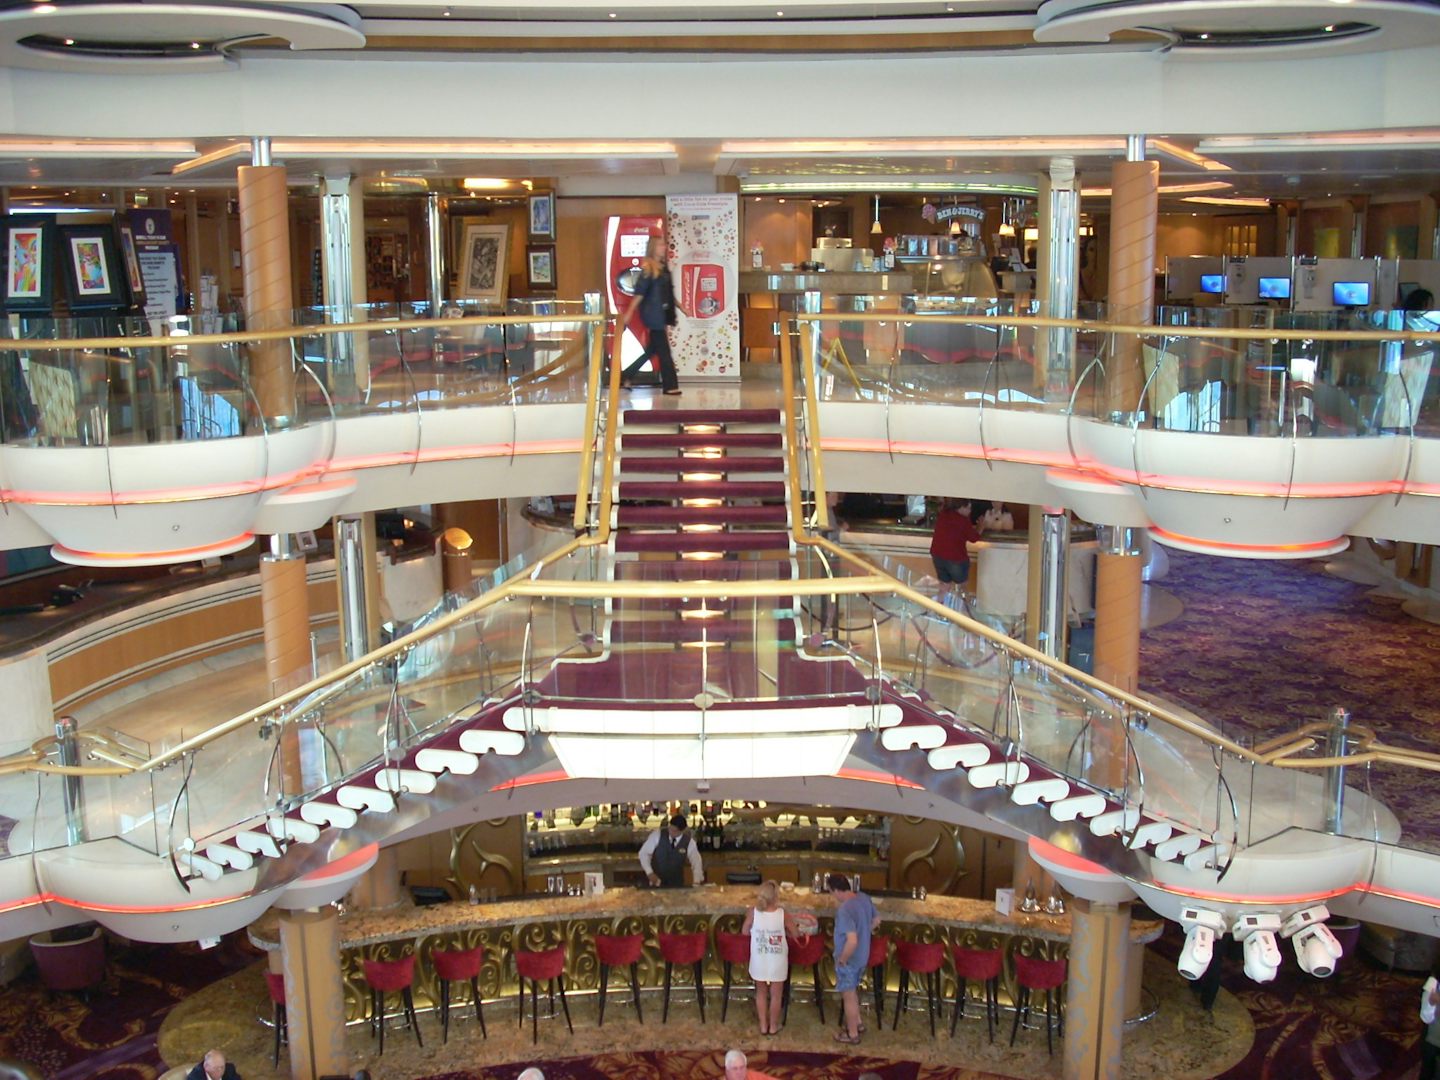 The Centrum is an activity center on the ship